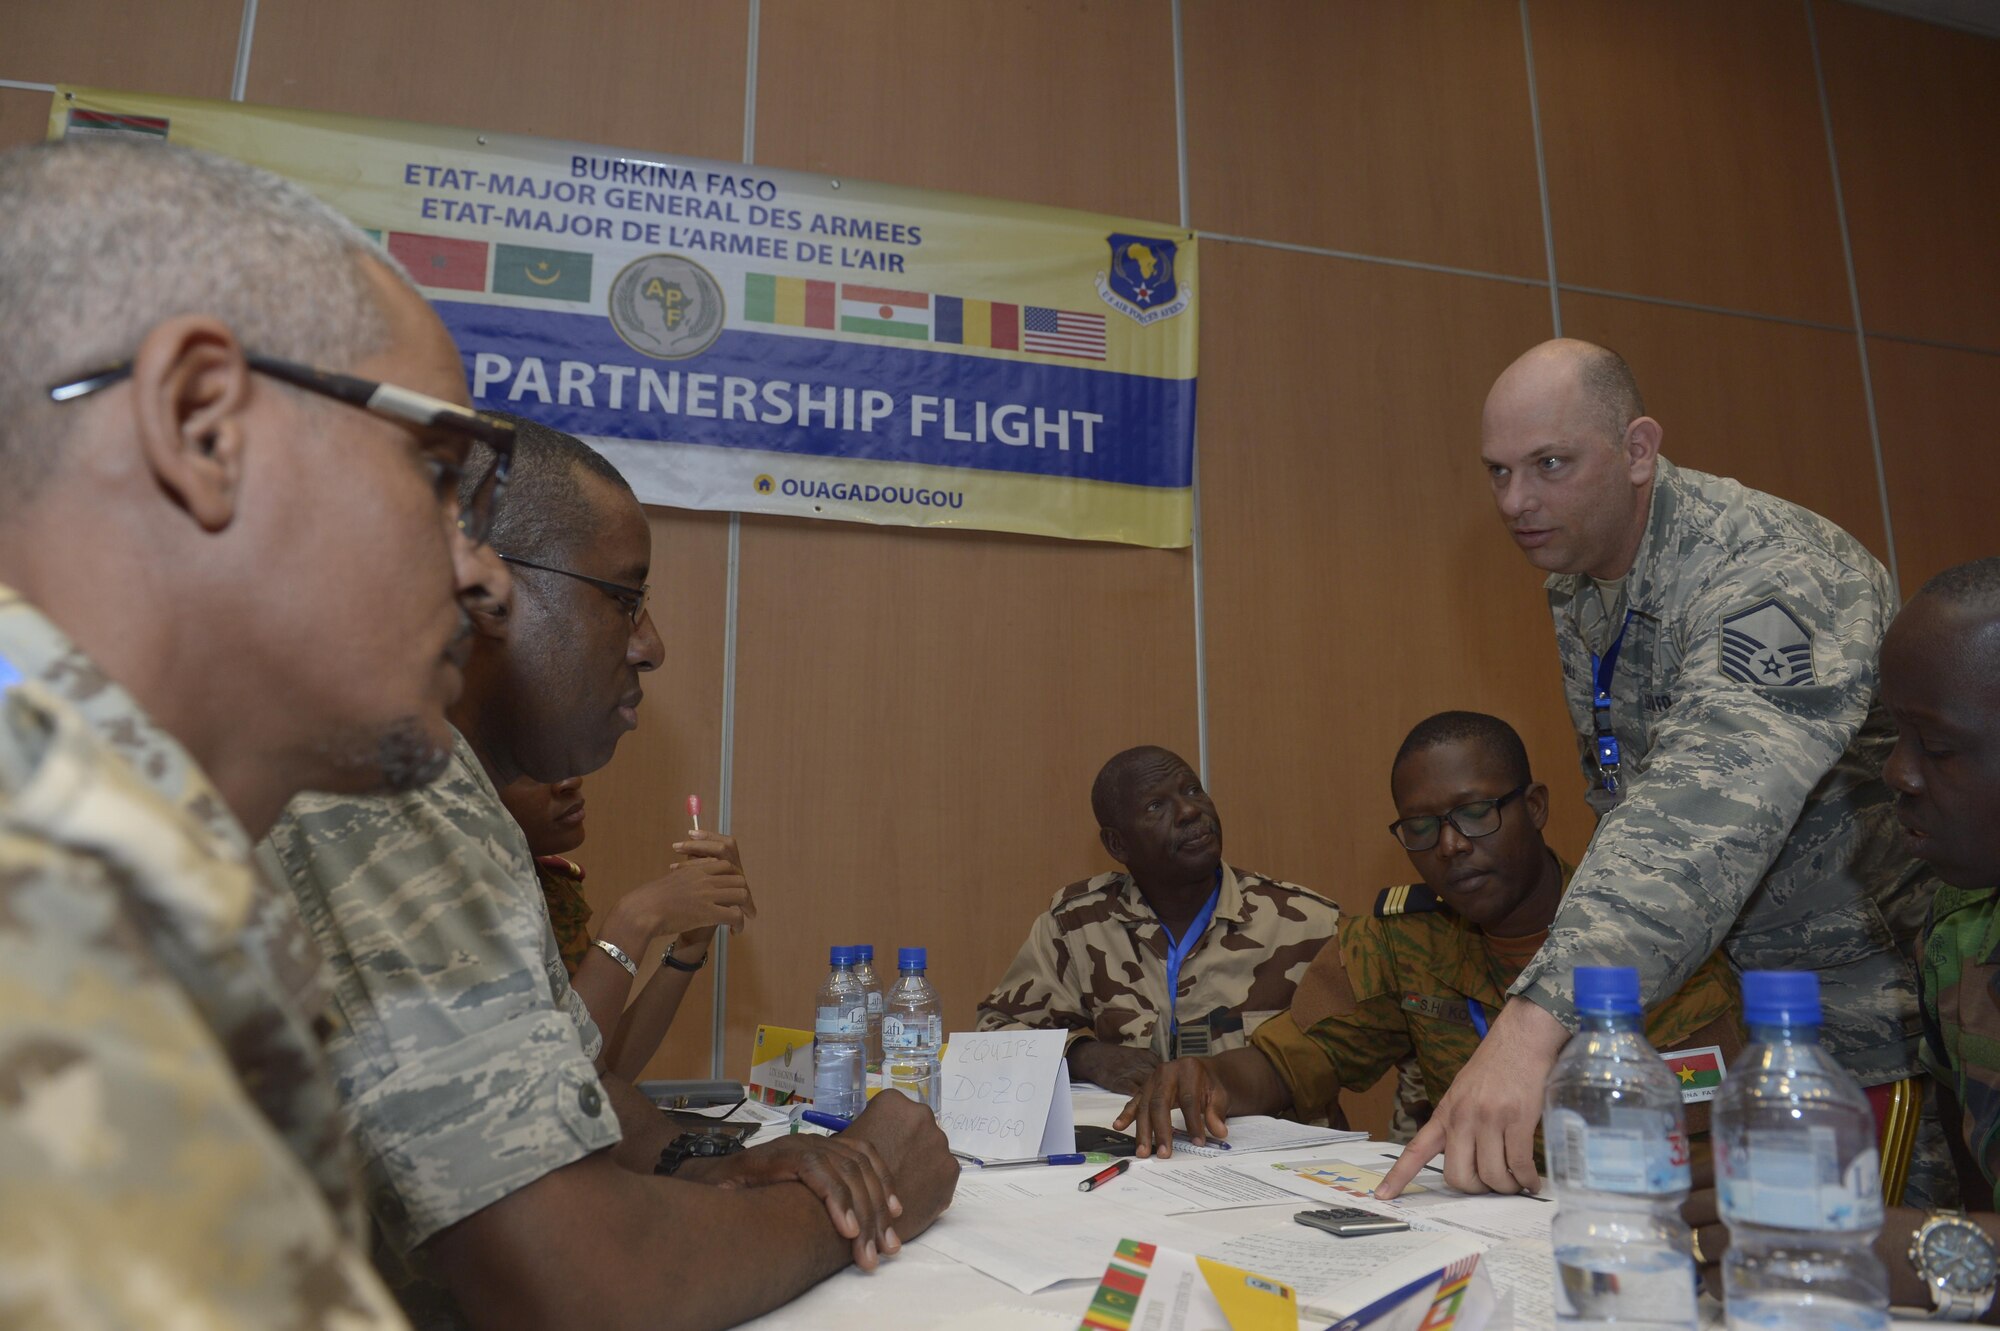 U.S. Air Force Master Sgt. Johnny Hall, right, 818th Mobility Support Advisory Squadron air advisor aircraft maintenance, talks with African Partnership Flight participants during a table top workshop in Ouagadougou, Burkina Faso, April 20, 2017. The intent of APF is to build strong transparent partnerships that enhance regional stability and security through formal alliances, partnerships and simple exchanges of information. (U.S. Air Force photo by Staff Sgt. Jonathan Snyder)